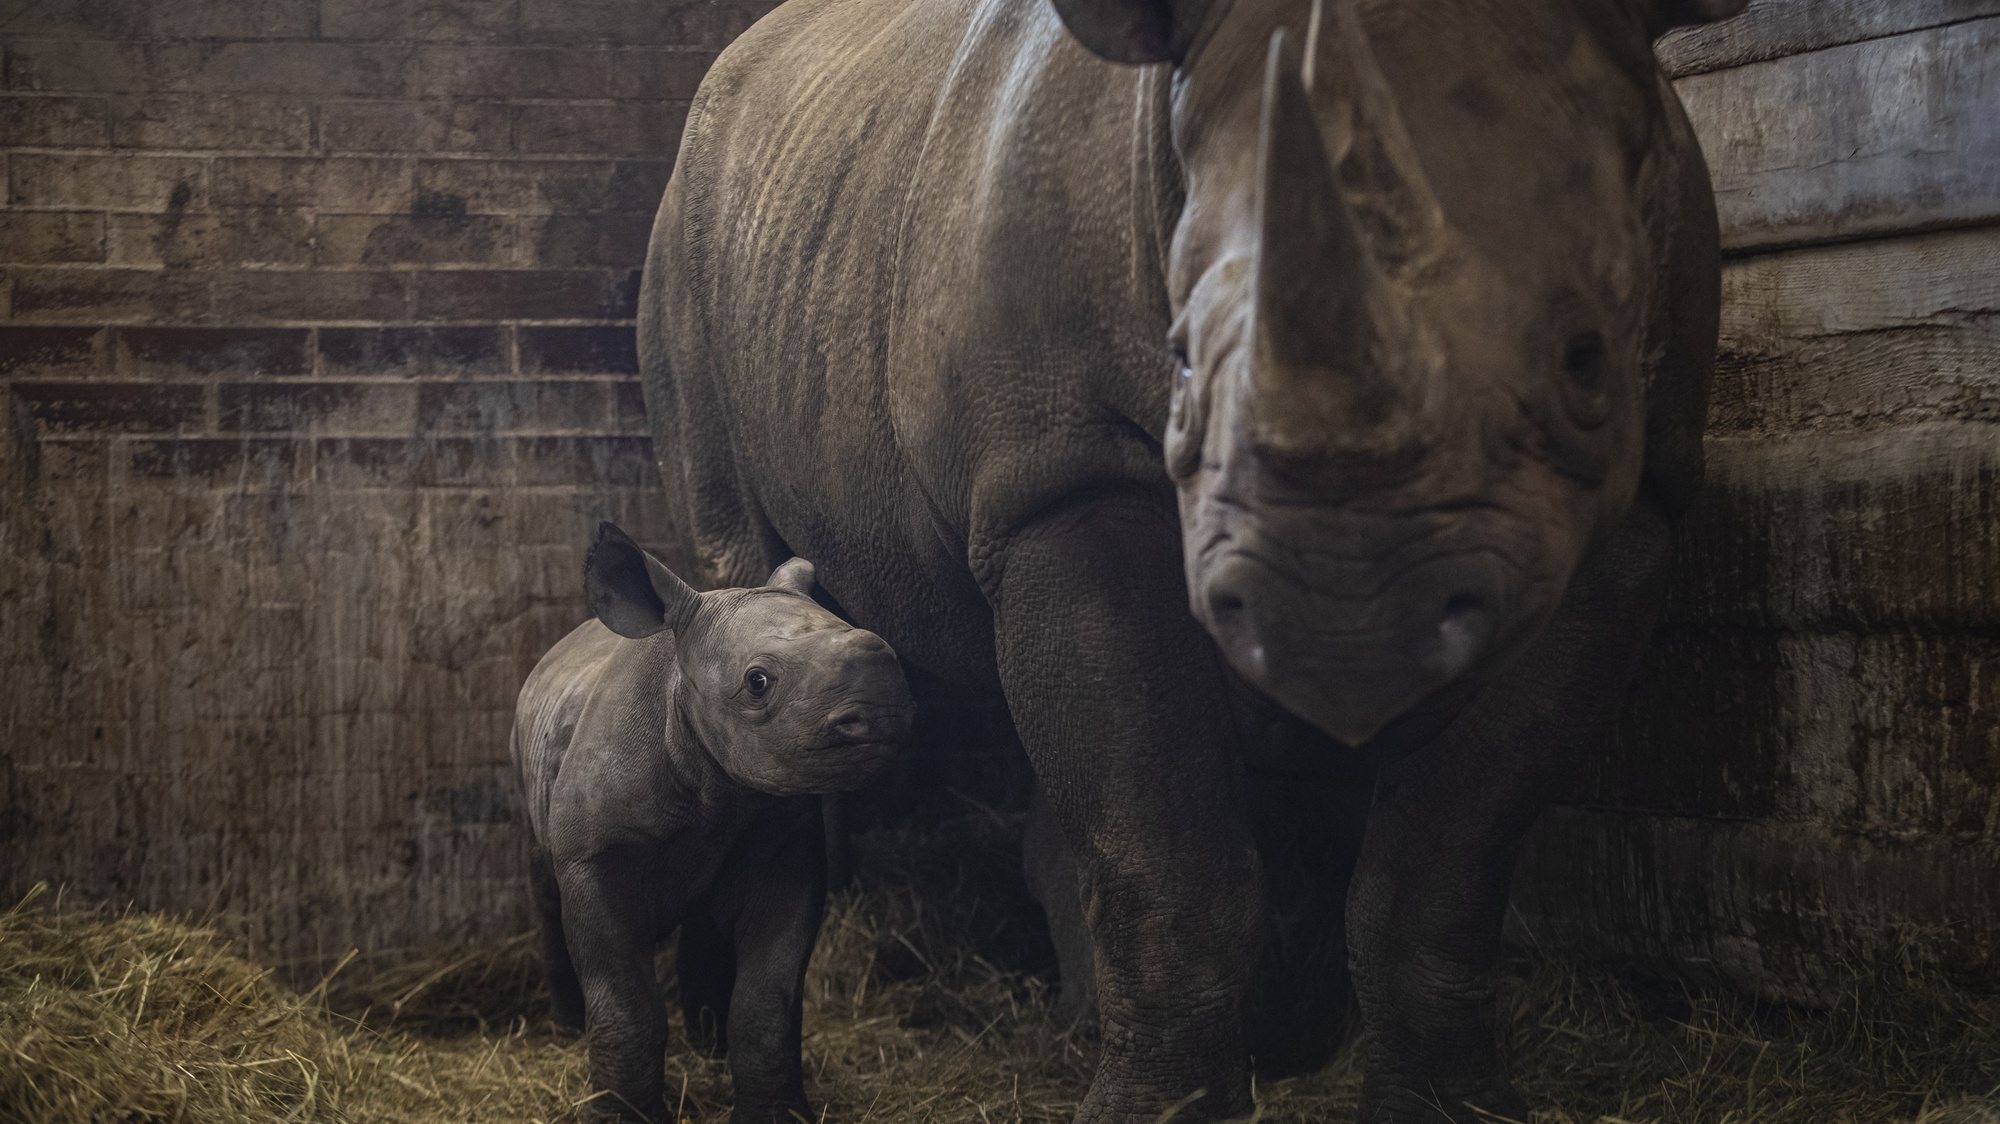 epa09828488 A twelve-day-old male eastern black rhinoceros (Diceros bicornis michaeli) calf stands next to his mother Eva inside their enclosure at the Safari Park in Dvur Kralove nad Labem, Czech Republic, 16 March 2022. The rhino species is listed as critically endangered. The calf was named Kiyv by its caregivers in support and honor of Ukrainian heroes, according to the director of the Dvur Kralove Safari Park, Premysl Rabas.  EPA/MARTIN DIVISEK